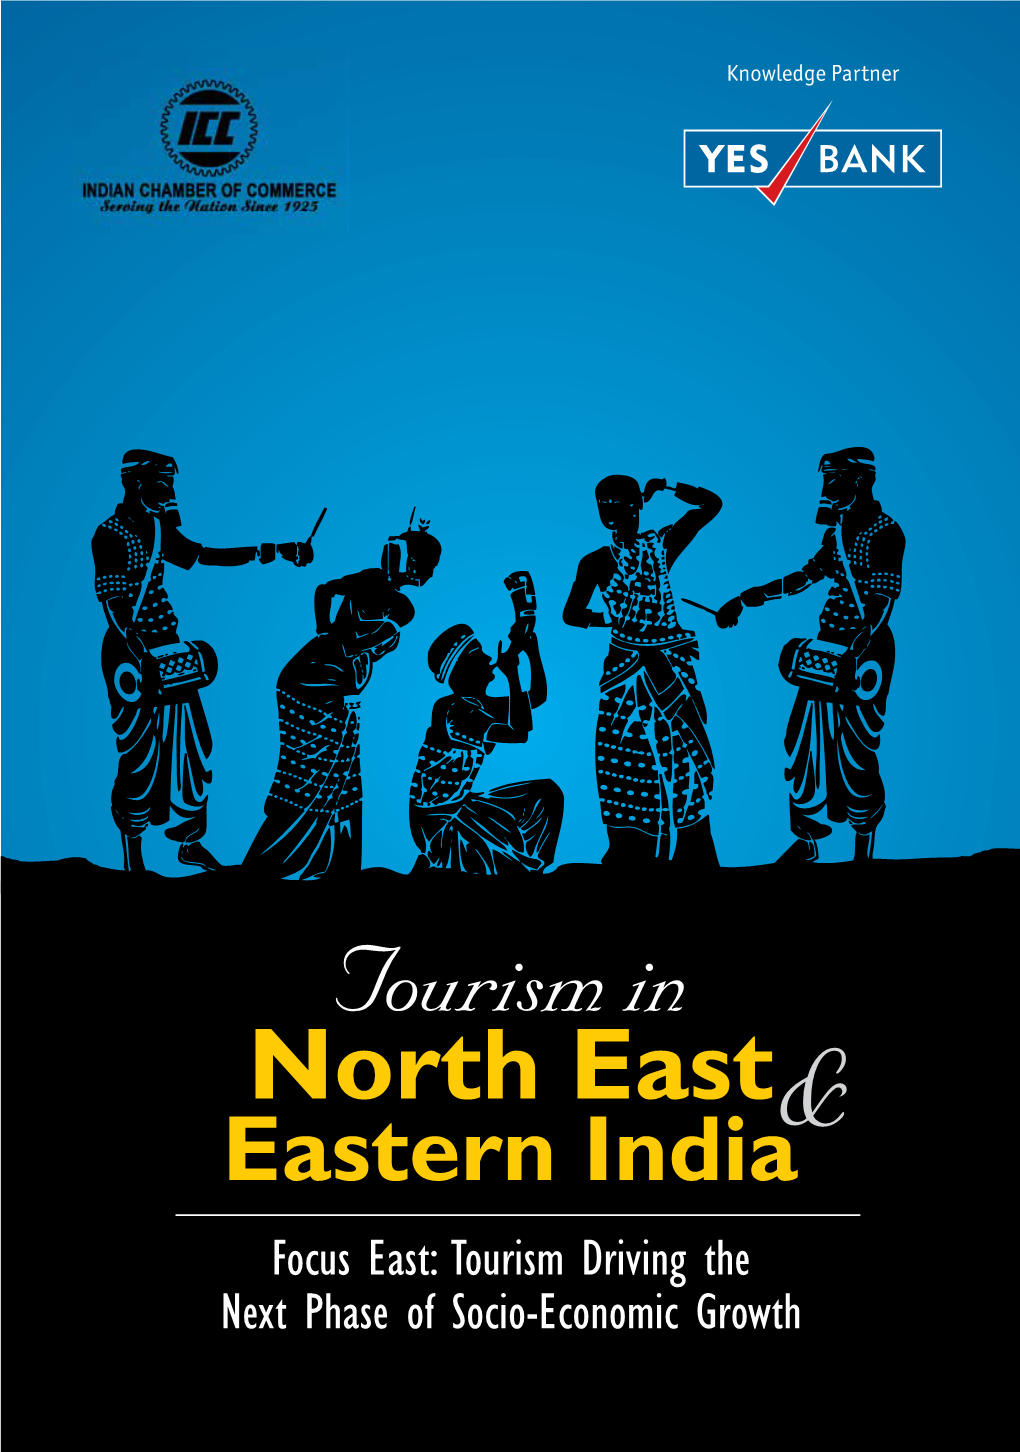 Tourism in North East Eastern India& Focus East: Tourism Driving the Next Phase of Socio-Economic Growth